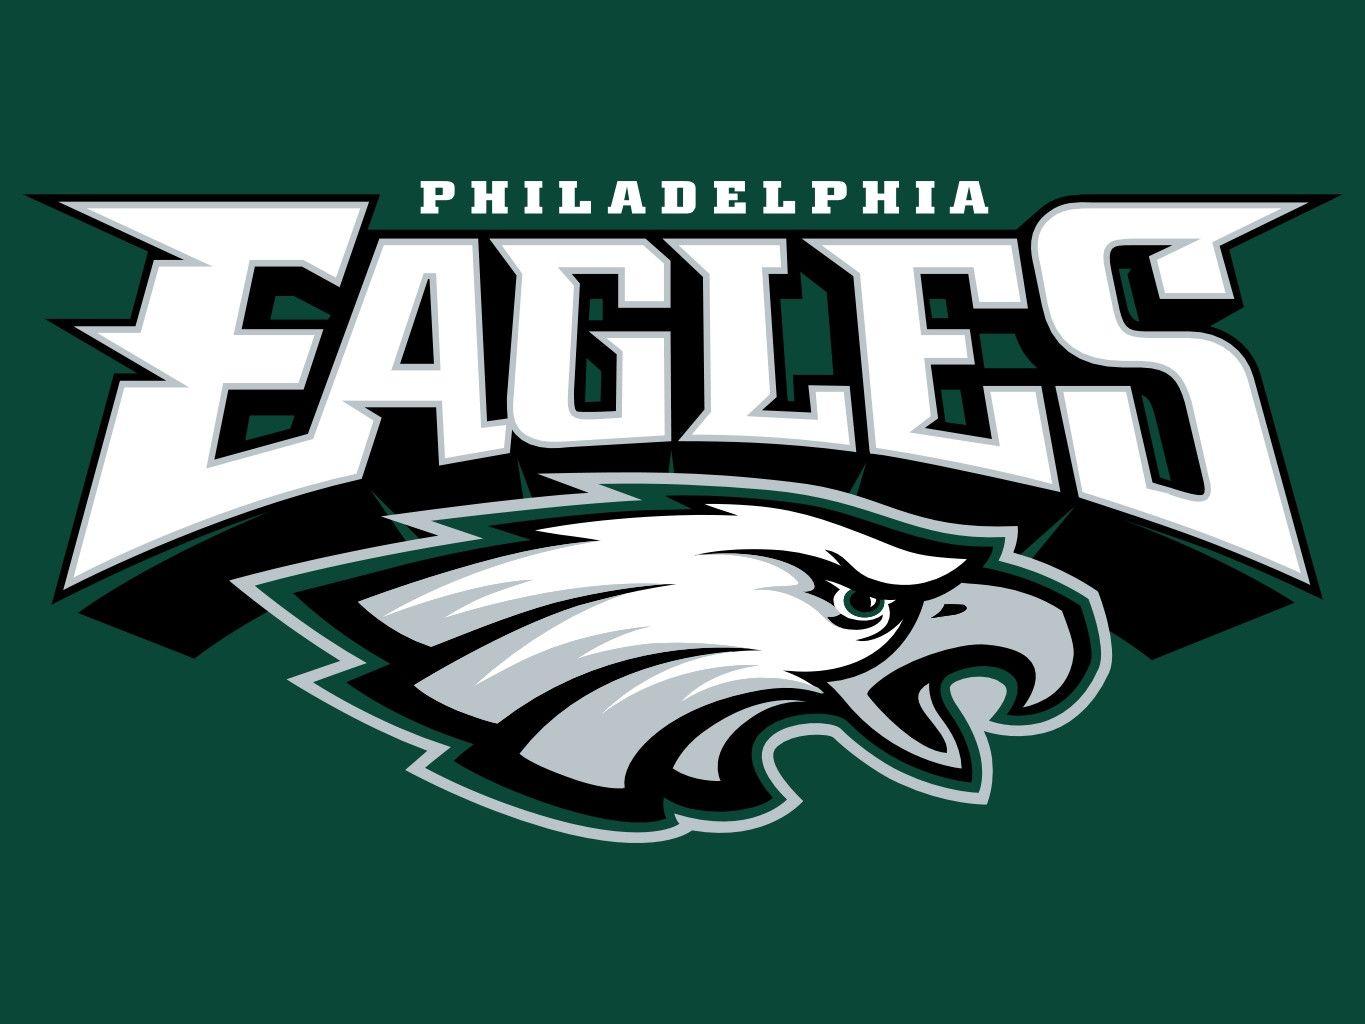 Philadelphia Eagles HD Wallpapers & Pictures